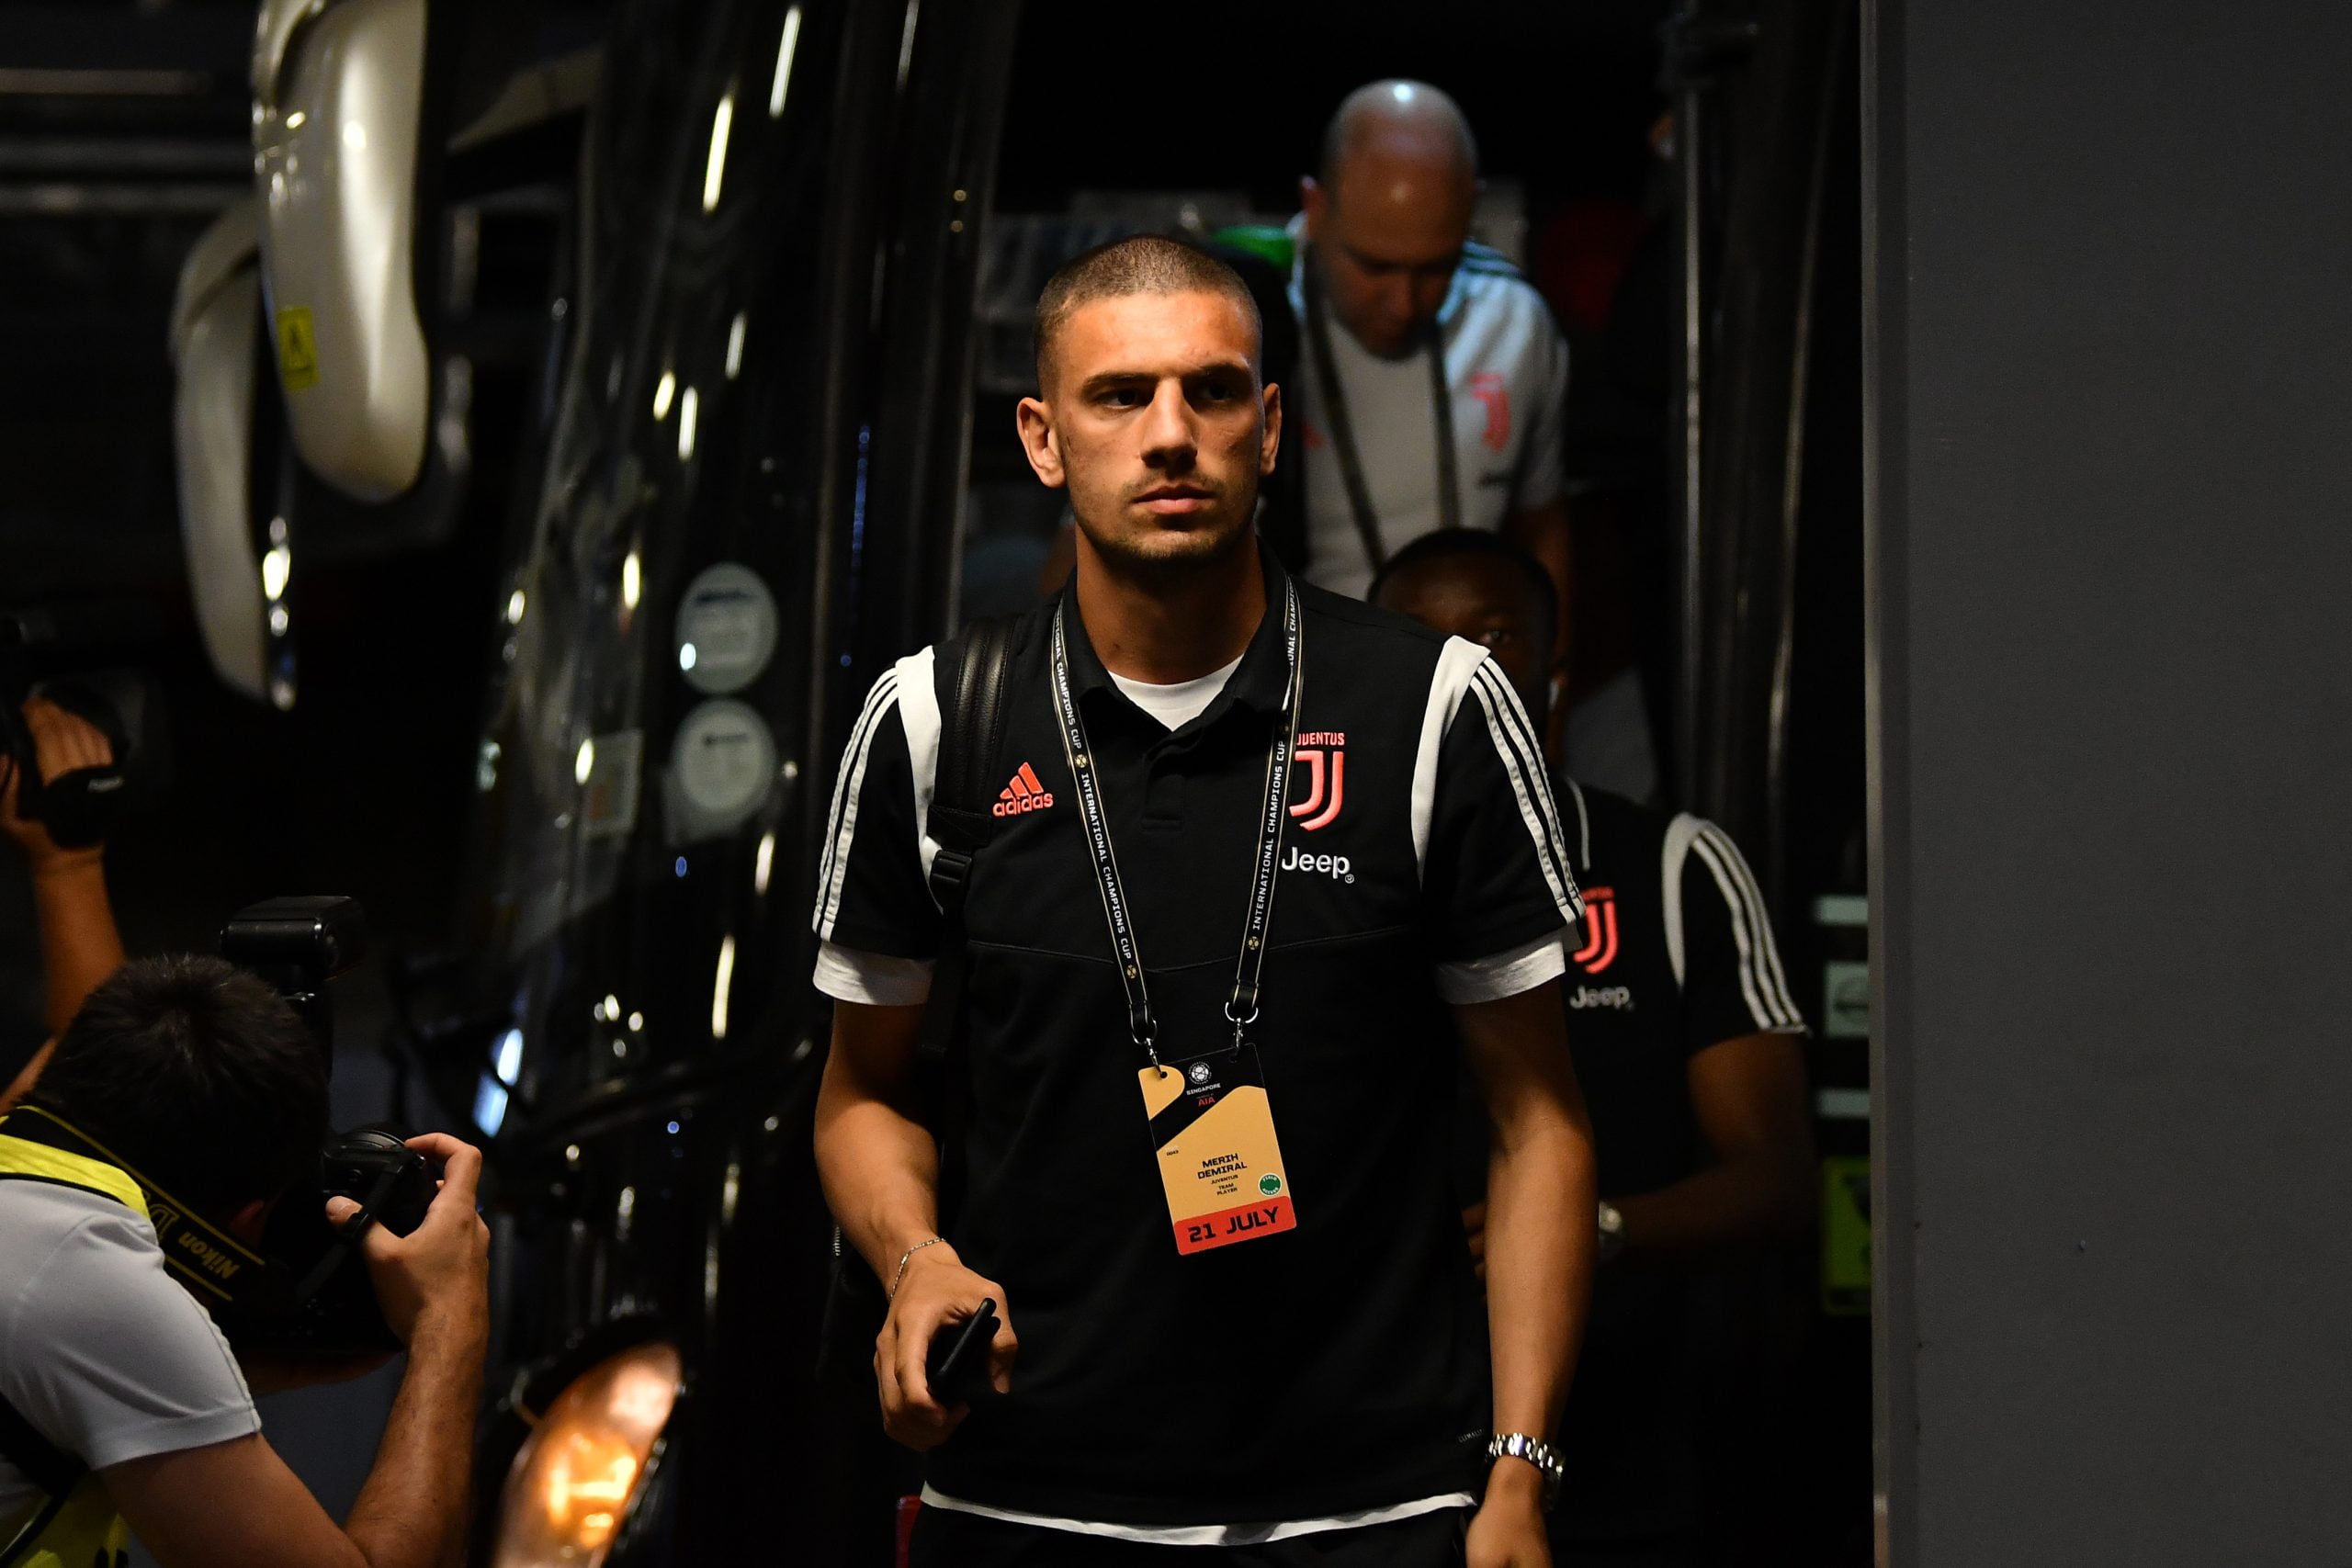 SINGAPORE, SINGAPORE - JULY 21: Merih Demiral of Juventus is seen on arrival at the stadium prior to the International Champions Cup match between Juventus and Tottenham Hotspur at the Singapore National Stadium on July 21, 2019 in Singapore. (Photo by Thananuwat Srirasant/Getty Images)